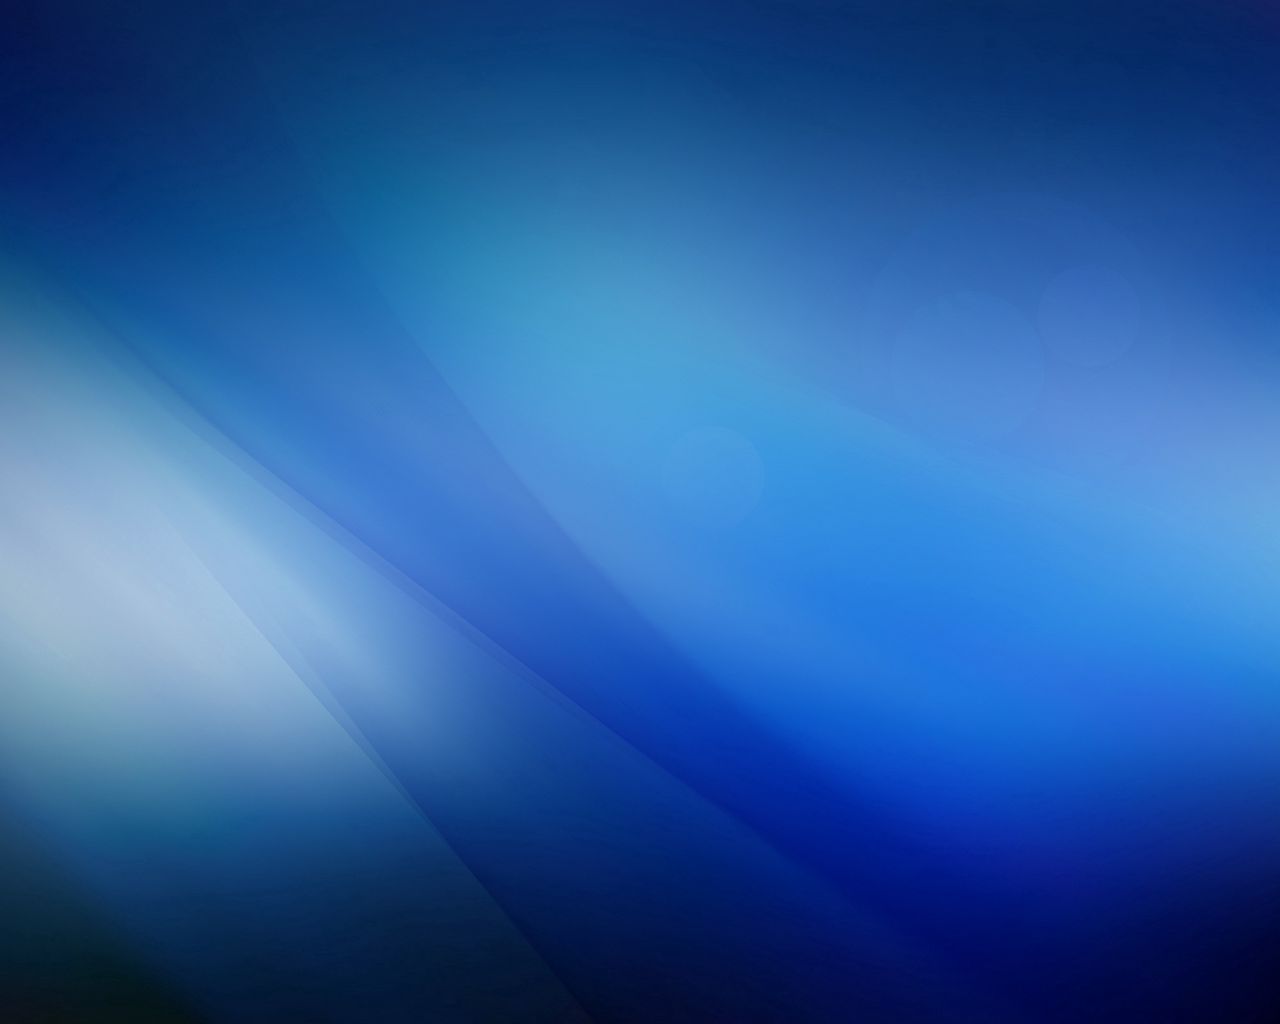 Download wallpaper 1280x1024 blue background, wave, abstract standard 5:4 hd  background